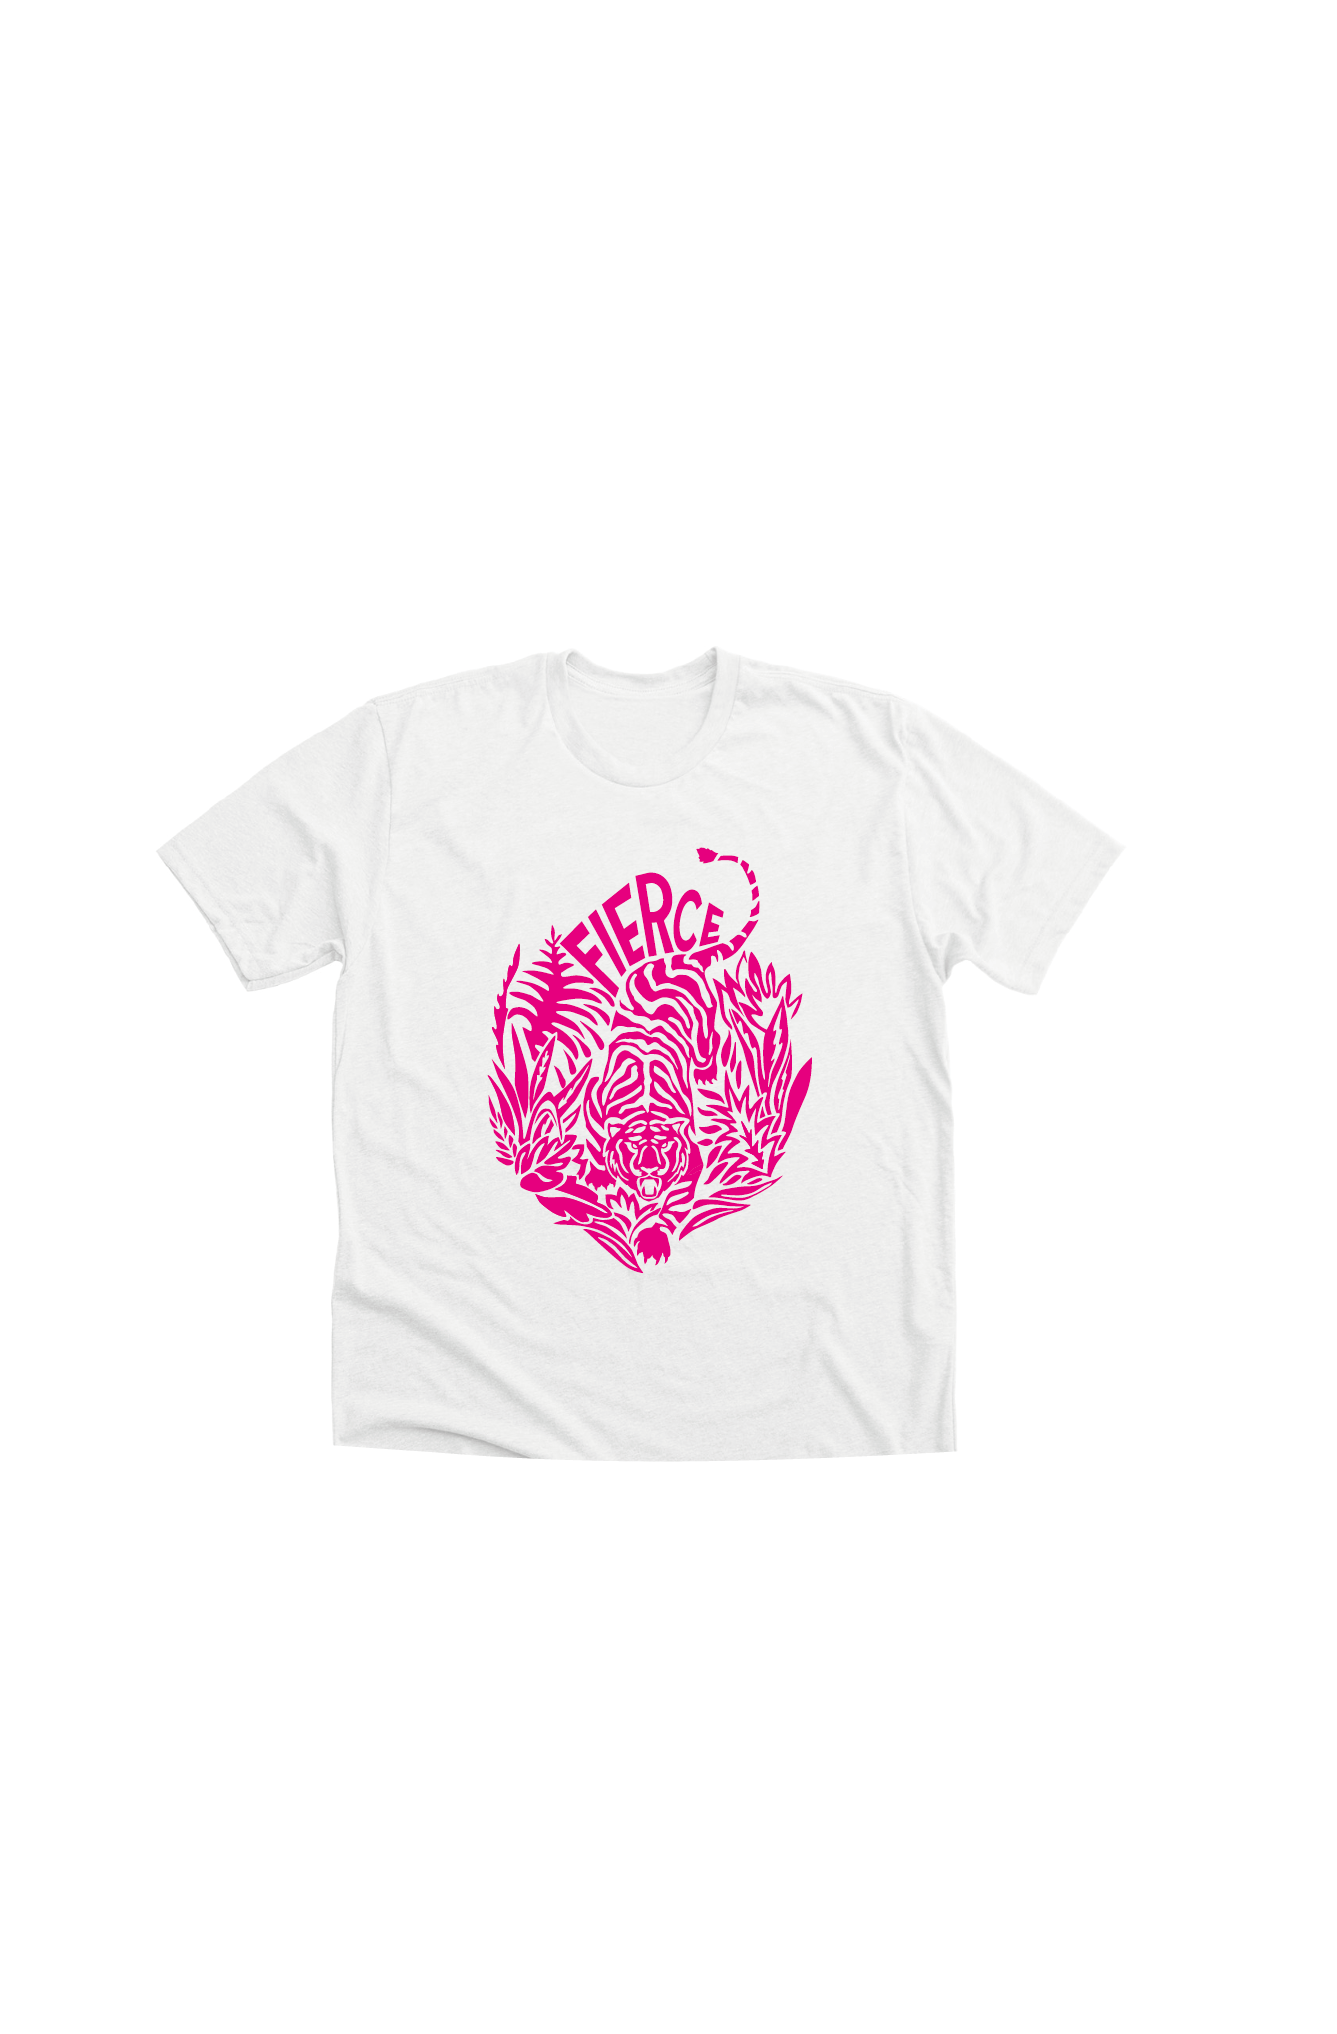 Ladies white crop top with a neon pink print of a tiger on the front